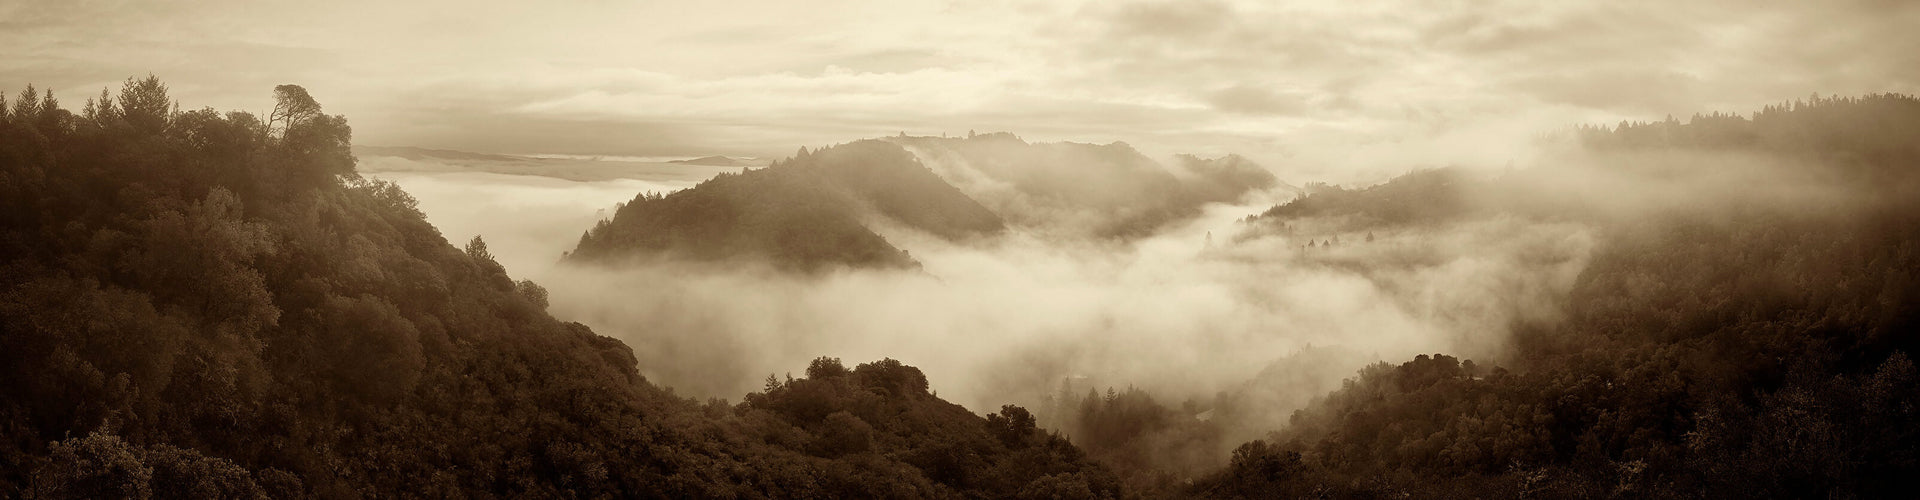 Fog covered Promontory Vineyards in Napa Valley